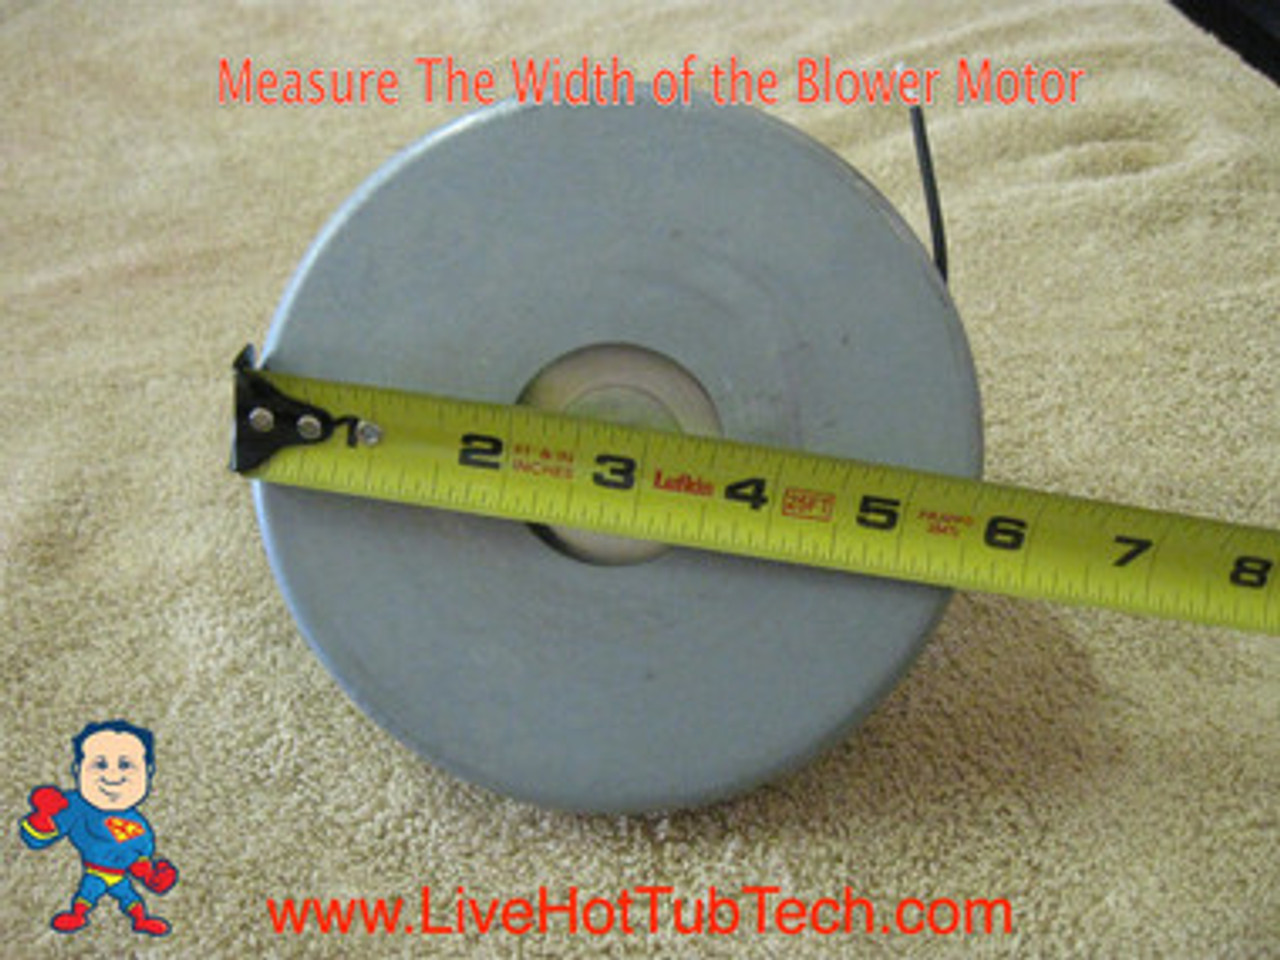 When choosing your blower motor you will need to measure the Width, Height and what Amperage and what Horse Power...The Height of the motor will give you a clue about the Horse Power... Note: Do not order a 115V in place of a 230 or Vice Versa you can damage the motor or the circuit. BE sure of all of these things before ordering.